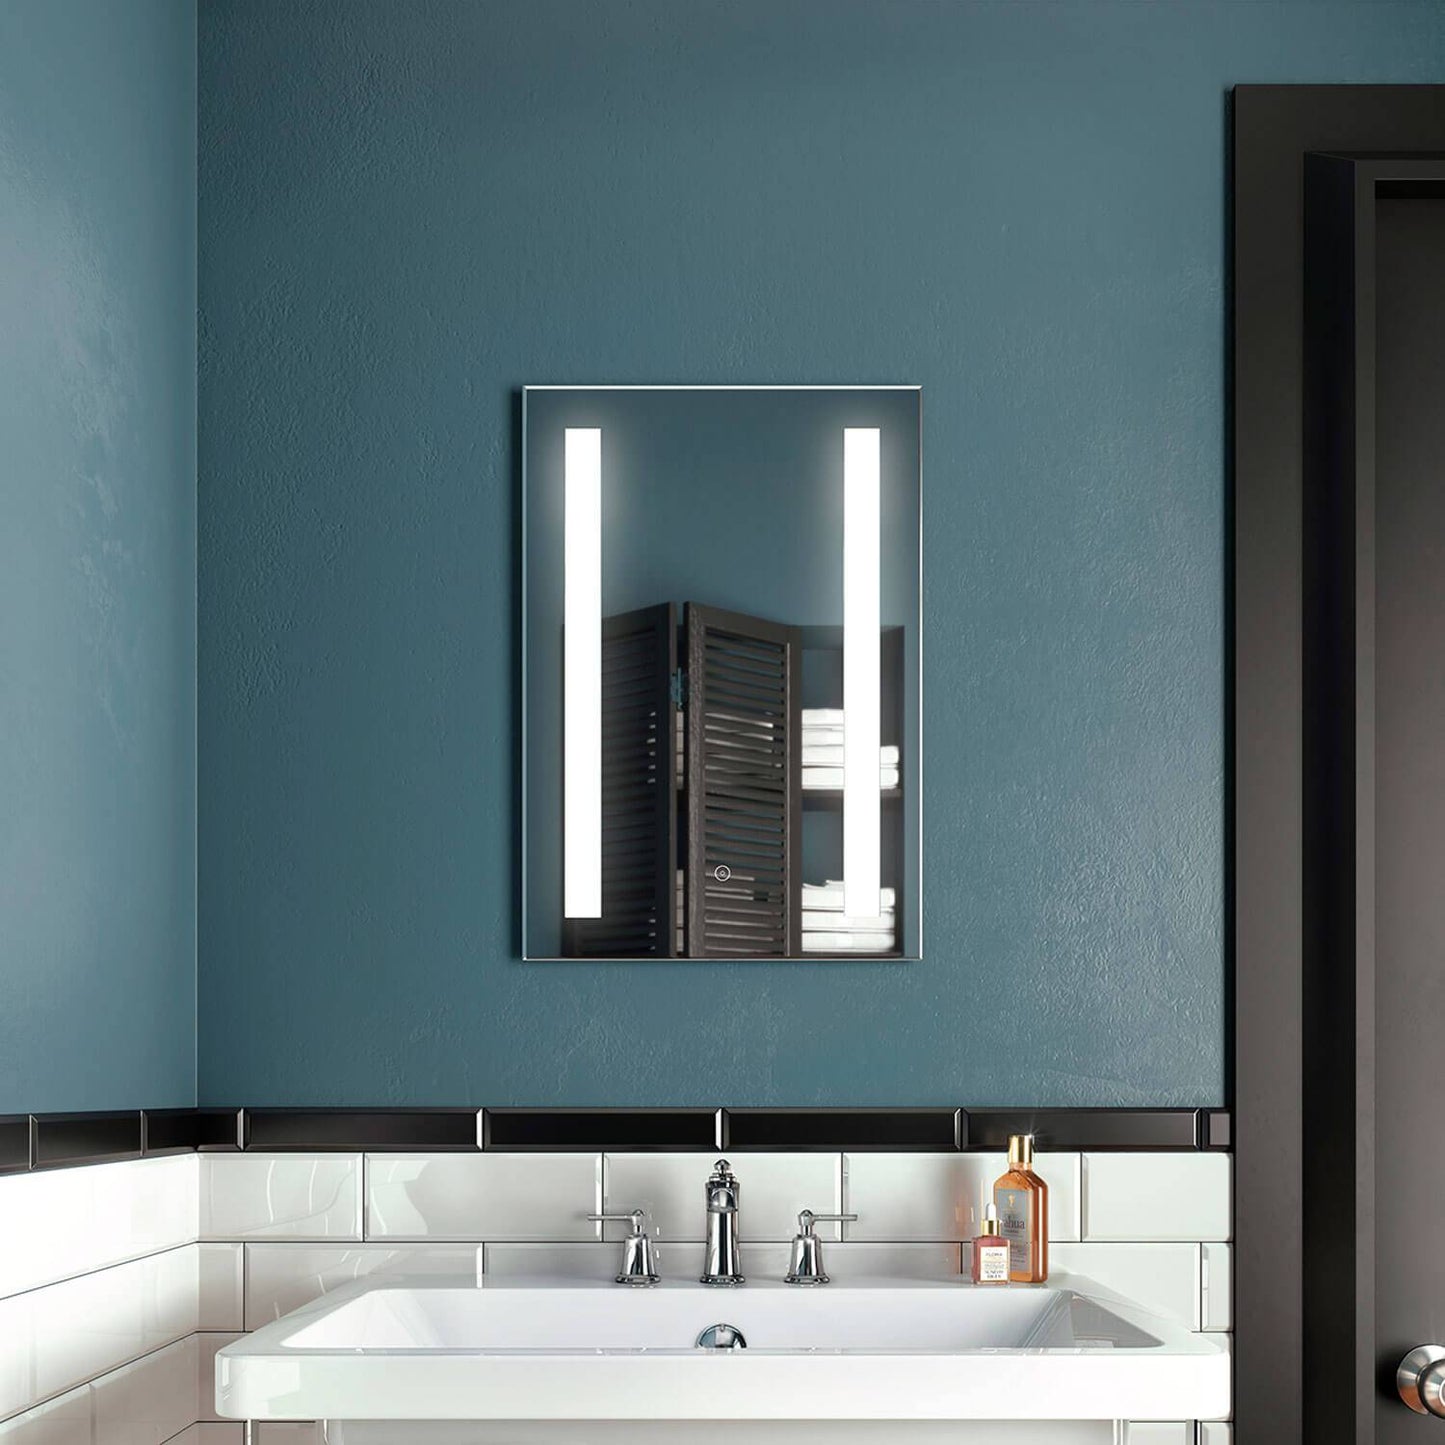 Kalia BRILIA Rect. LED Lighting Mirror 18" x 26" With Frosted Vertical Bands Within and 2-Tones Touch Switch